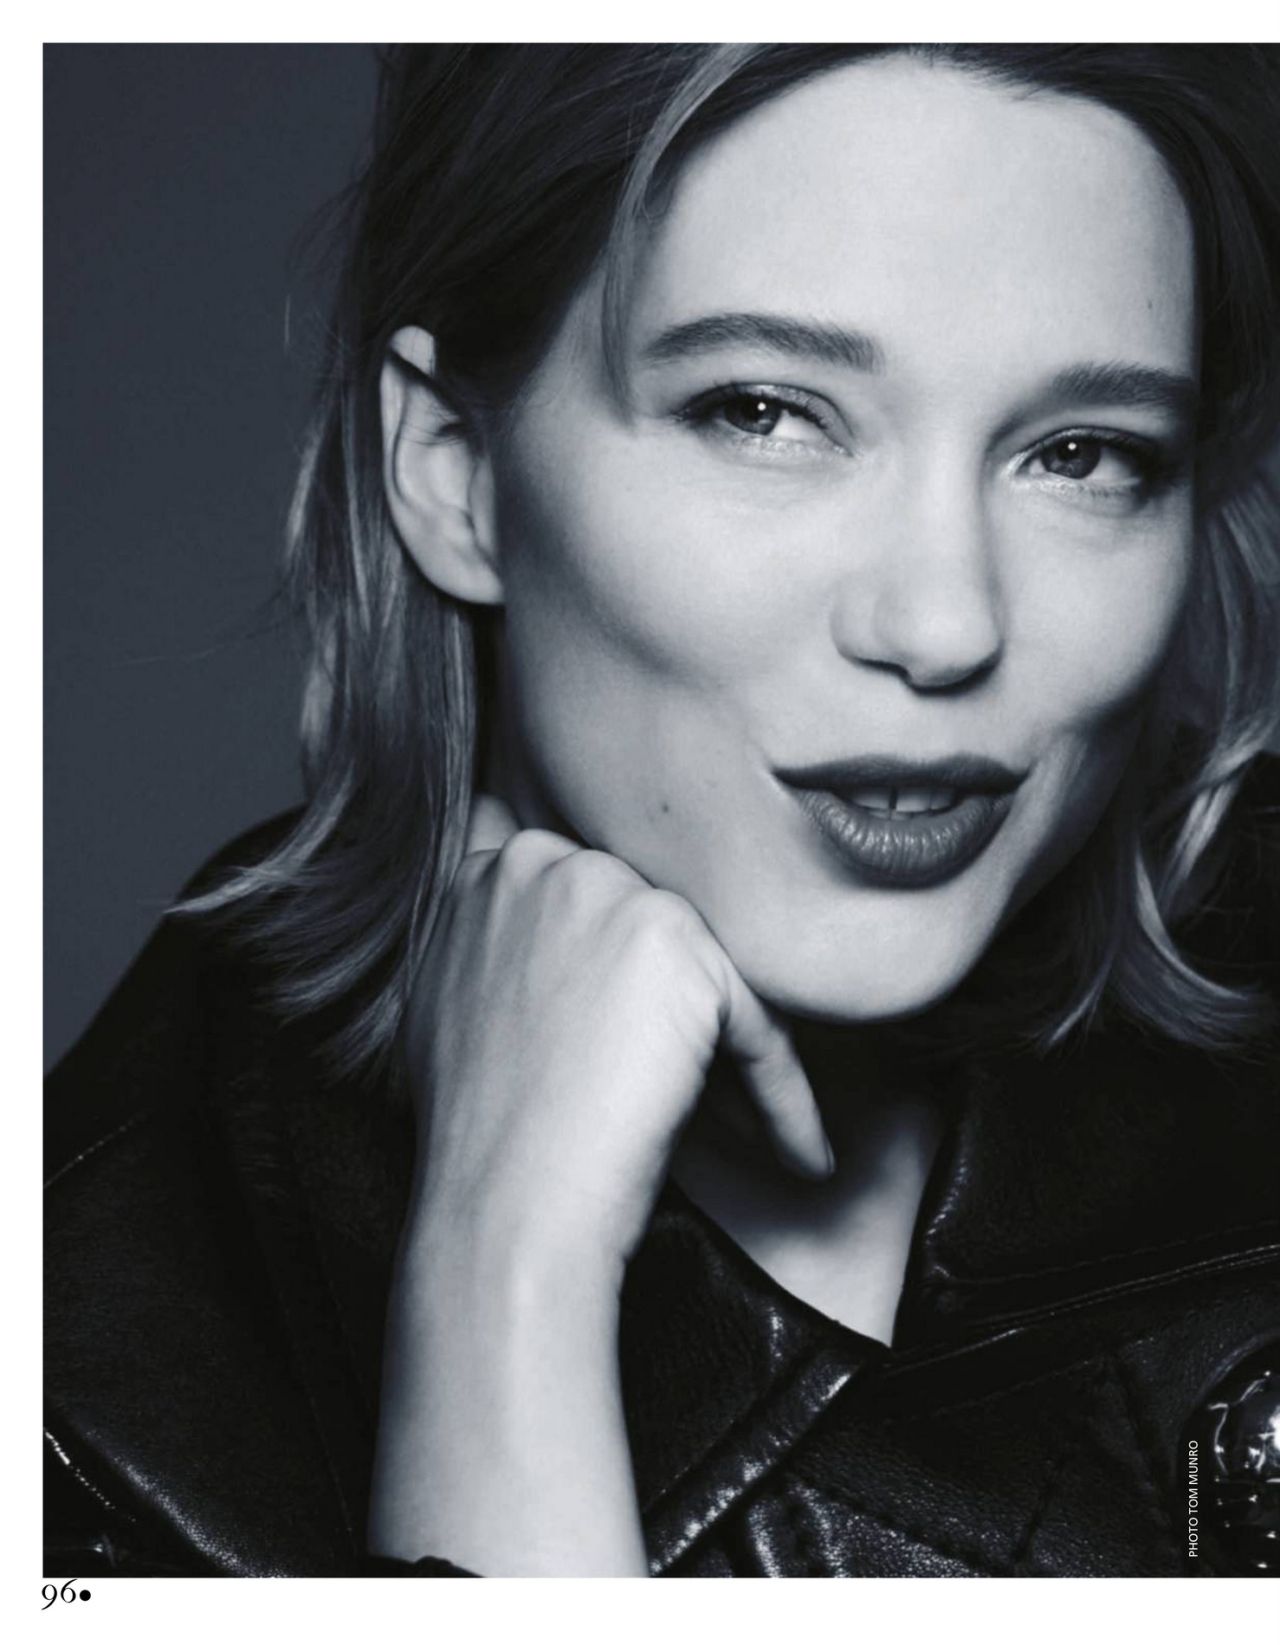 Léa Seydoux and Adèle Exarchopoulos cover Madame Figaro May 12th